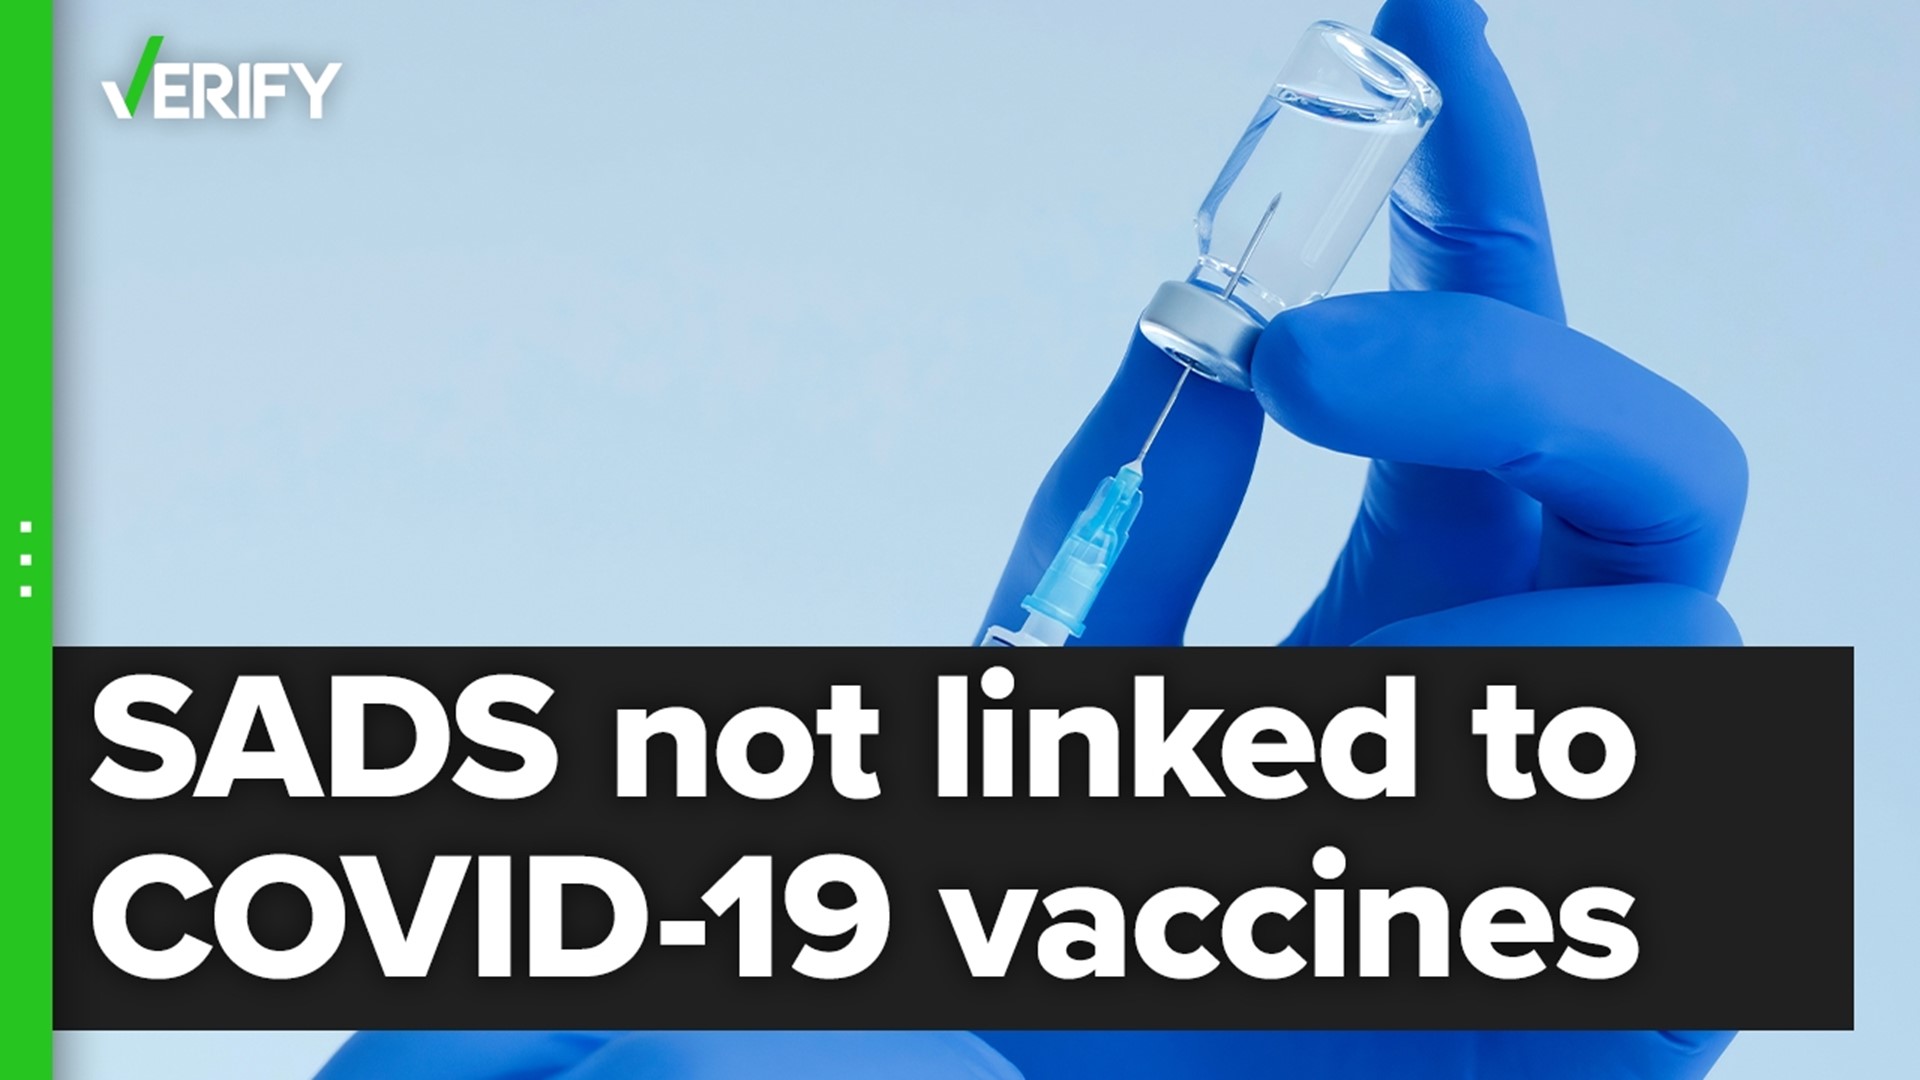 Is Sudden Adult Death Syndrome linked to vaccines? The VERIFY team confirms this is false.